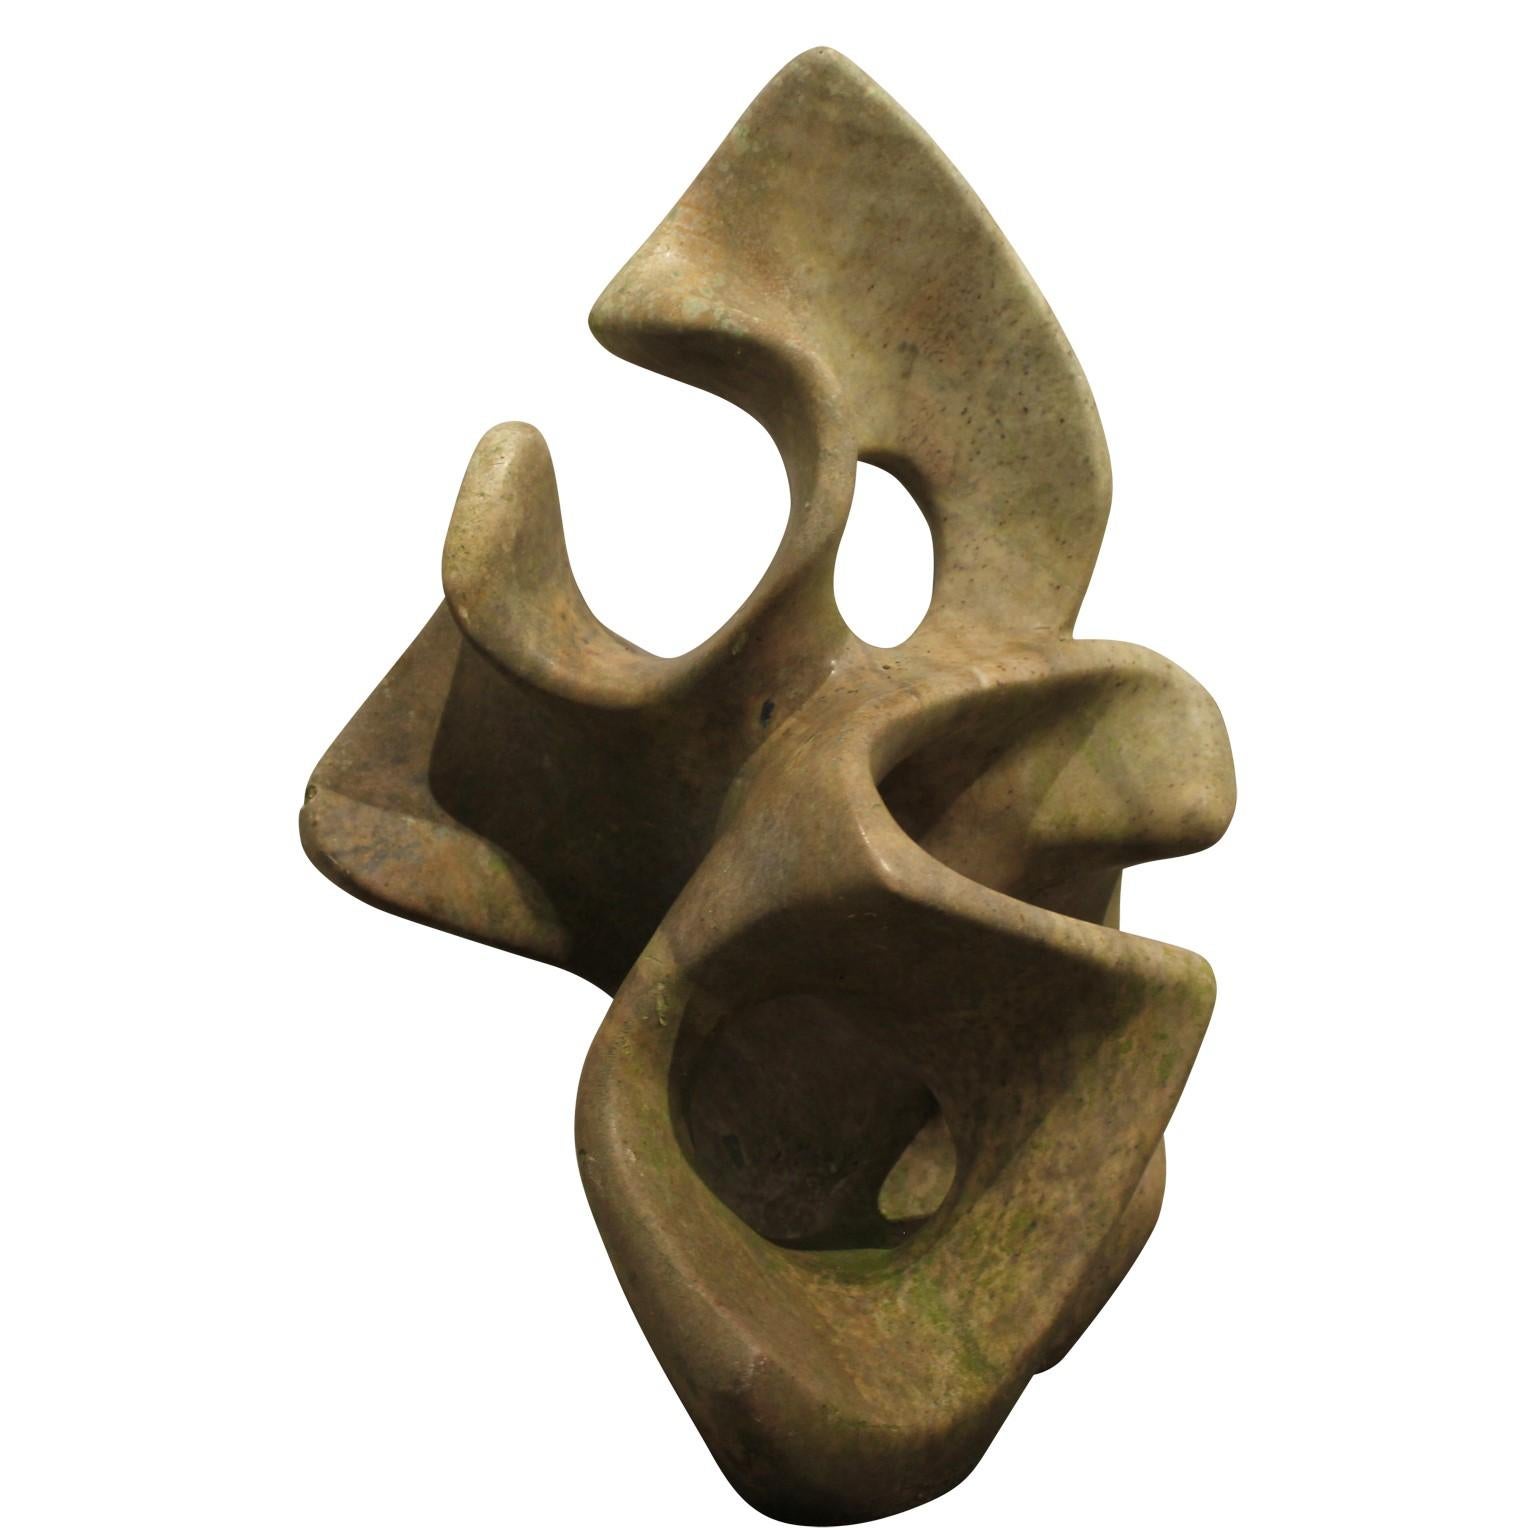 Organic shaped abstract sculpture made out of stone. Sculpture has natural toned from the rock.